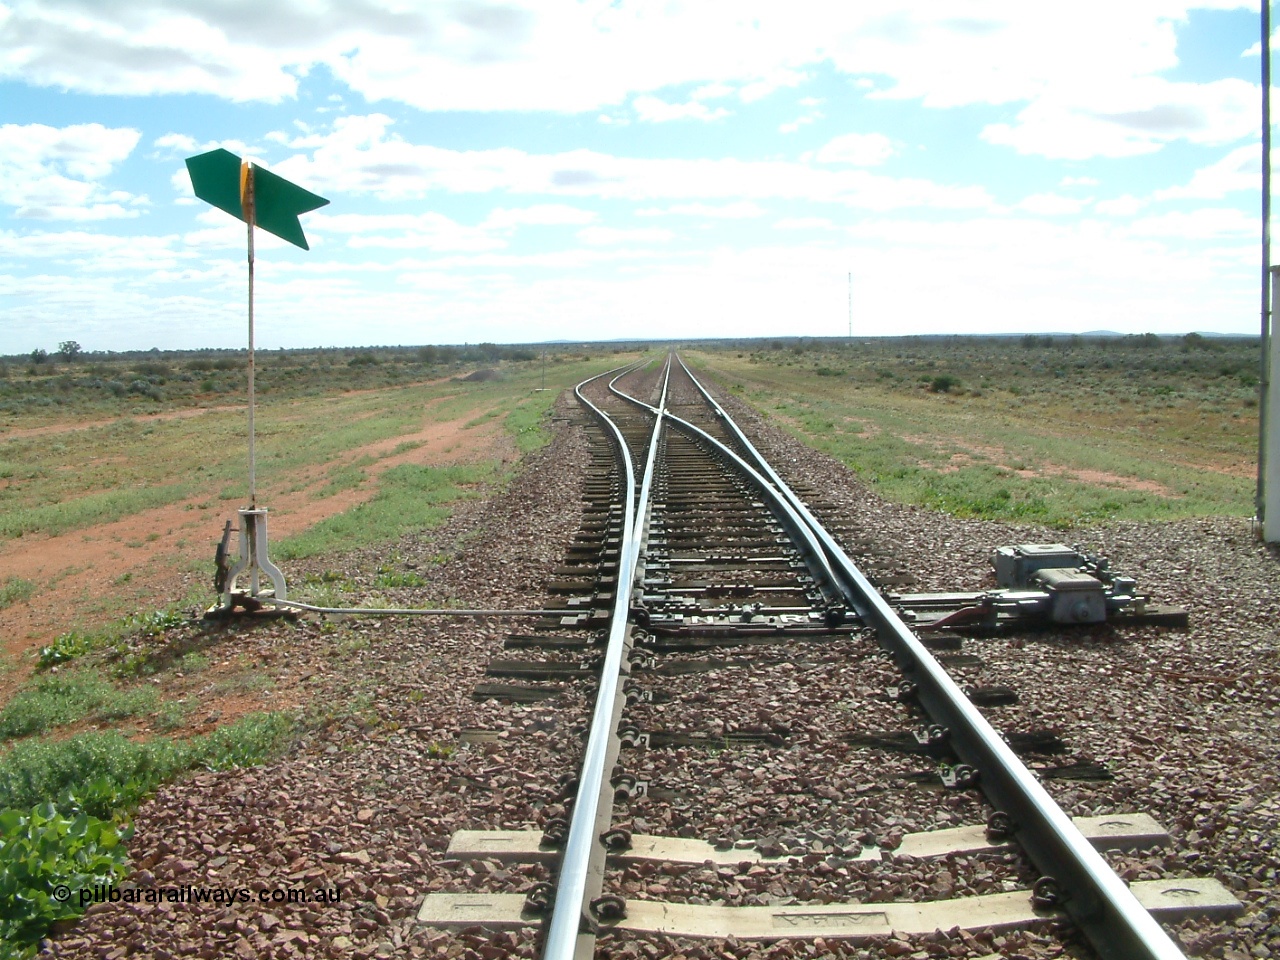 030415 145938
Ferguson, located at the 469 km on the Trans Australian Railway, looking west at the east end of the 1800 metre long crossing loop, point work on timber sleepers, indicator and lever with dual control point machine on the right. [url=https://goo.gl/maps/XNaMGCNxZ4yv7Lrr9]GeoData location[/url].
